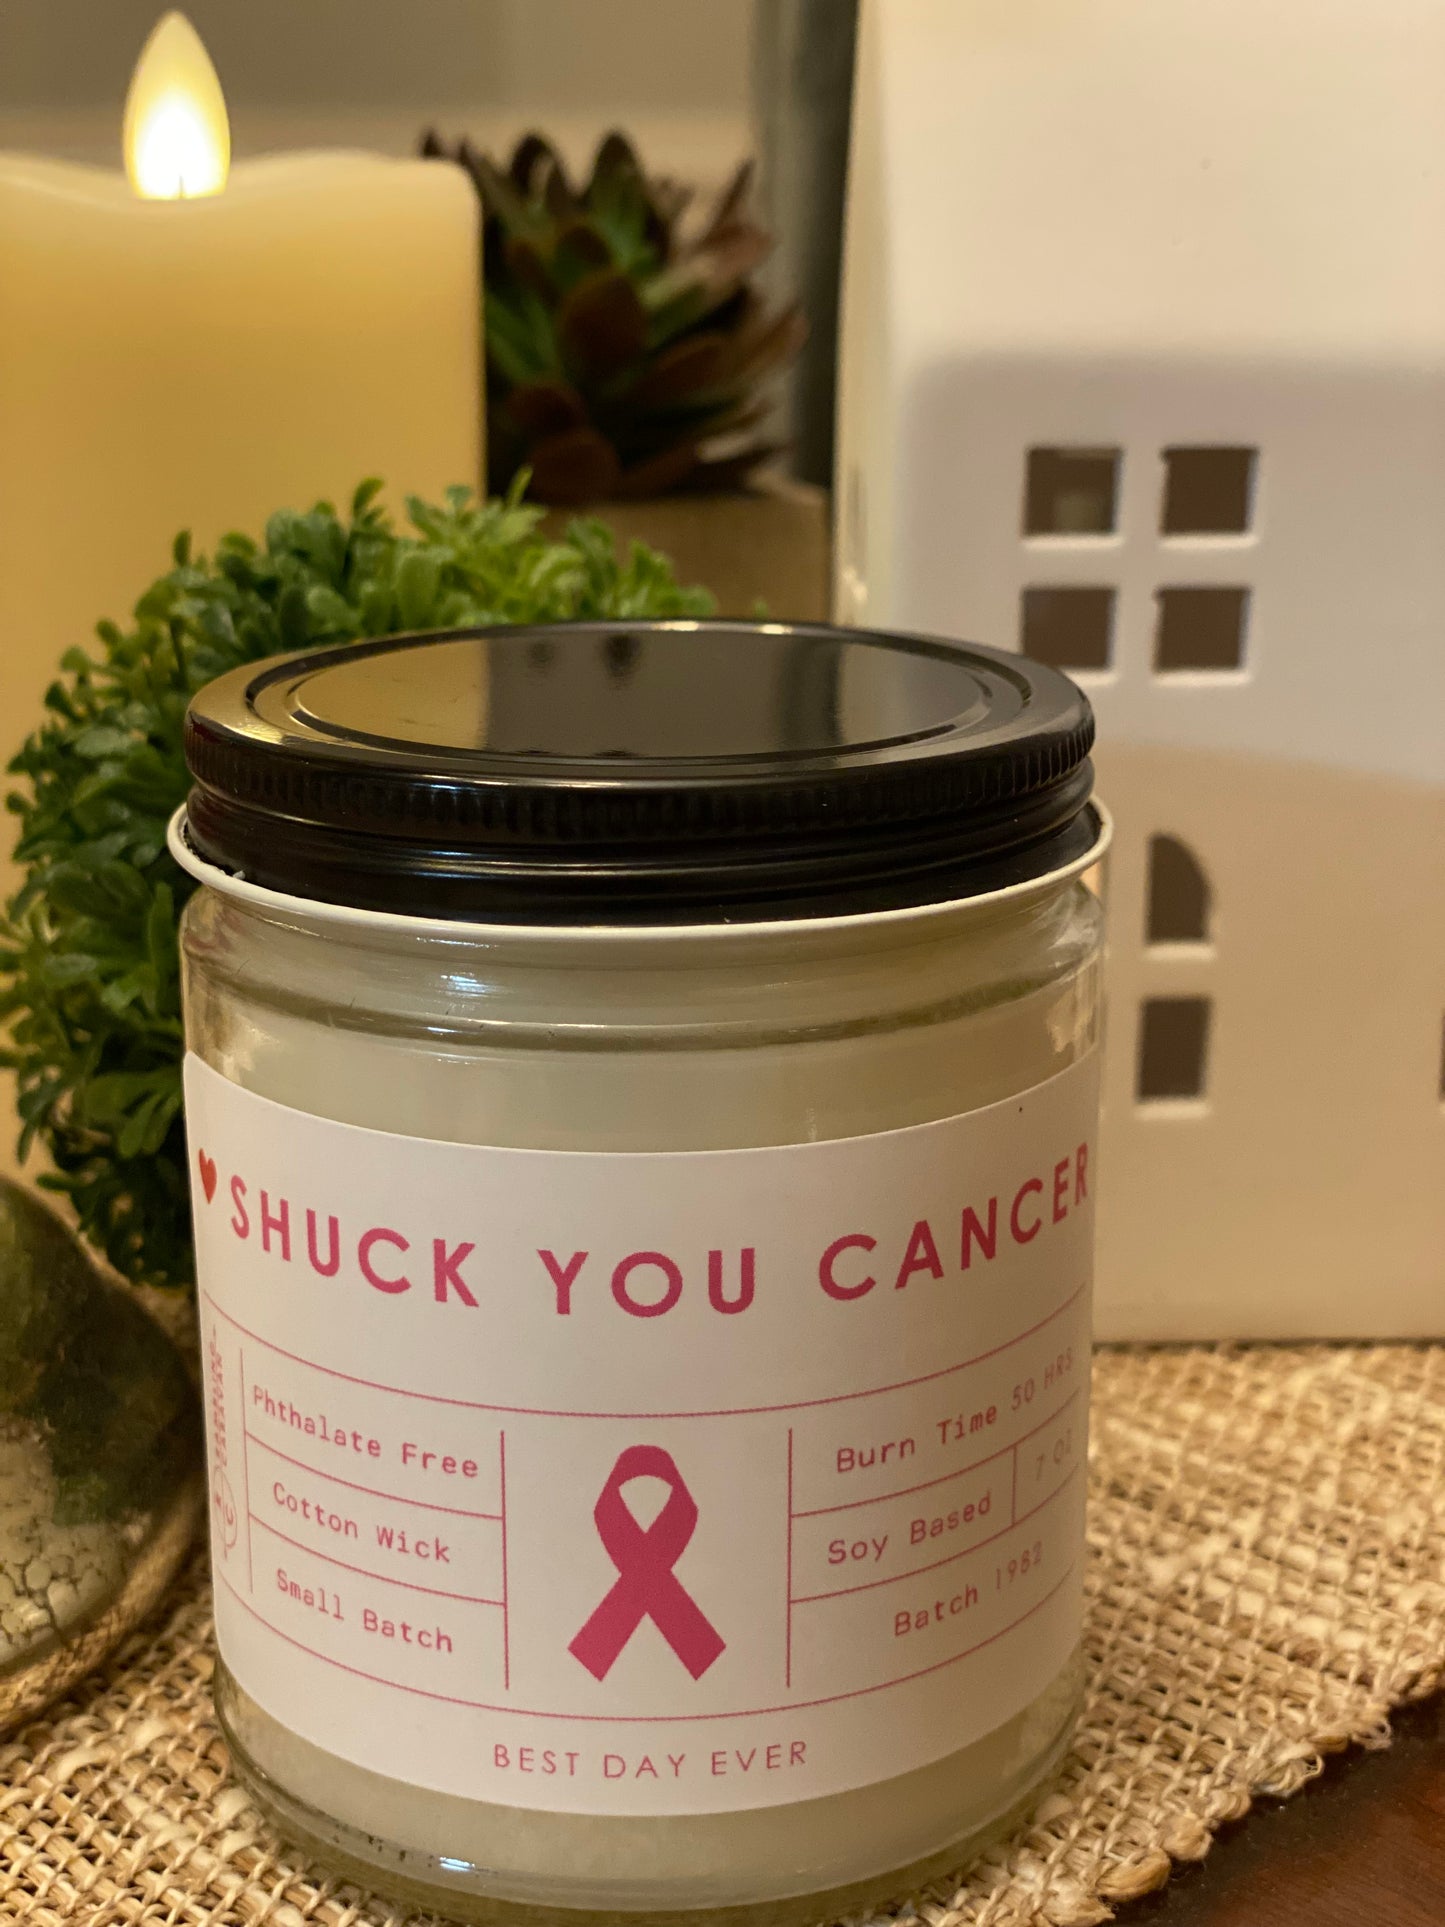 Shuck You Cancer (Breast Cancer) Pink Candle